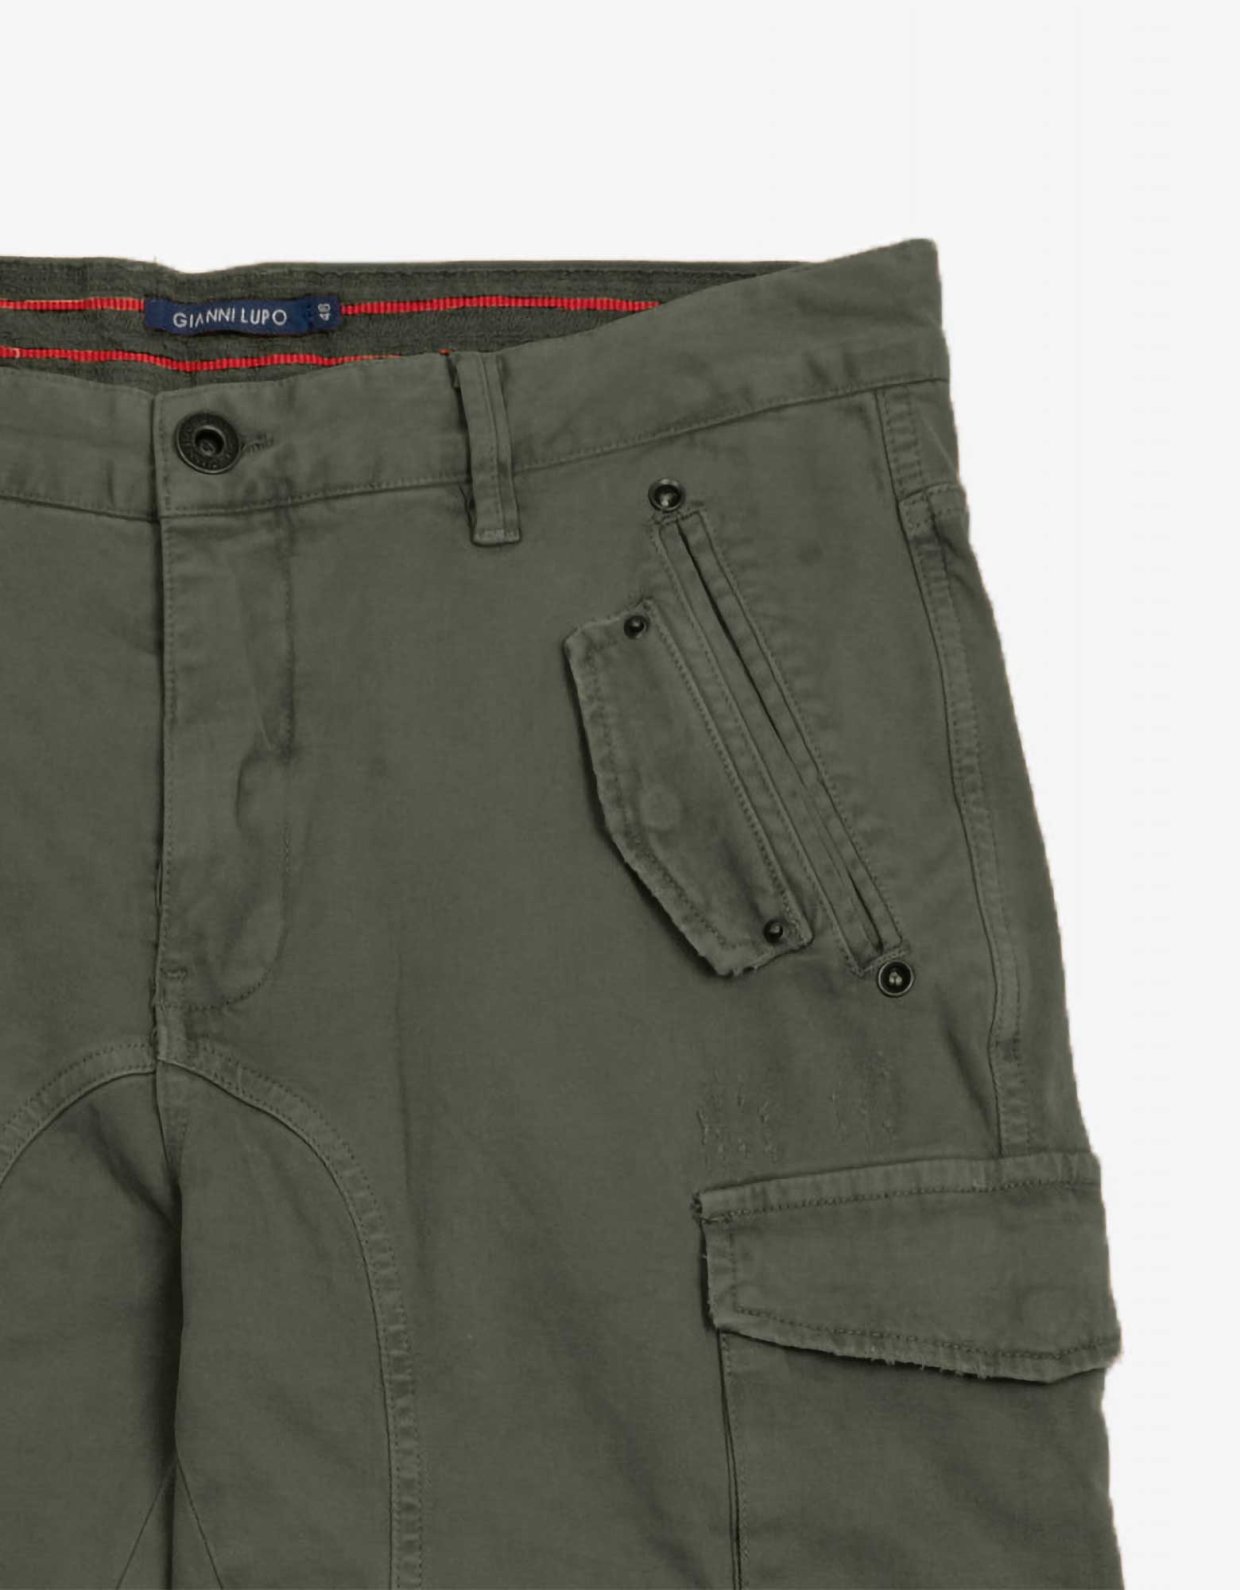 Gianni Lupo Slim fit cargo pants military